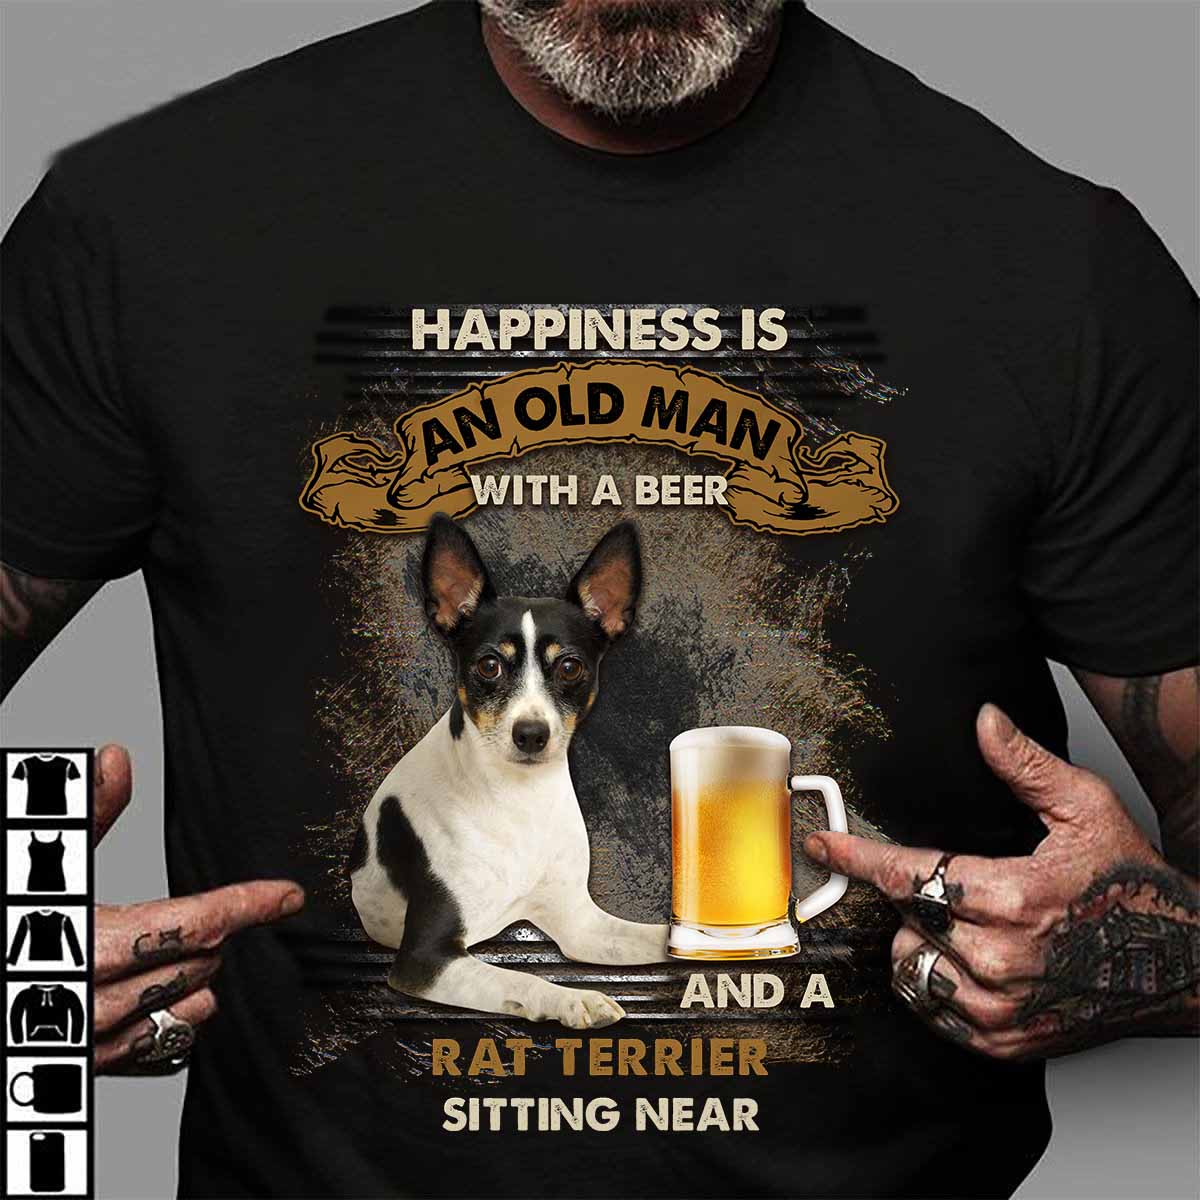 Happiness is an old man with a beer and a Rat terrier sitting near